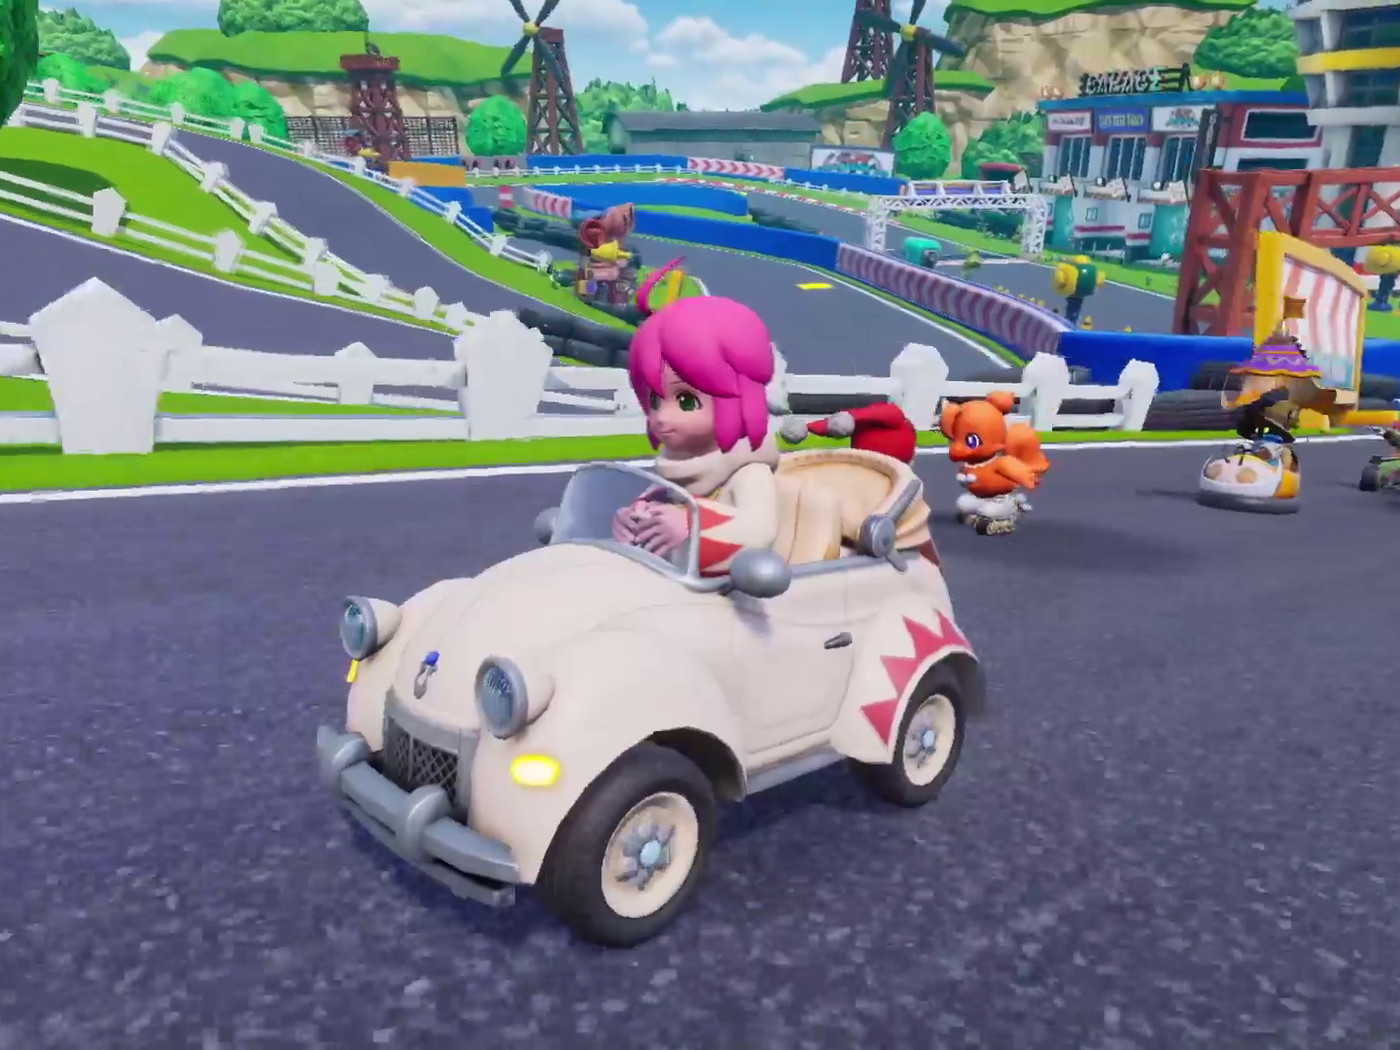 Final Fantasy's new kart racer is rife with microtransactions, despite $50 price